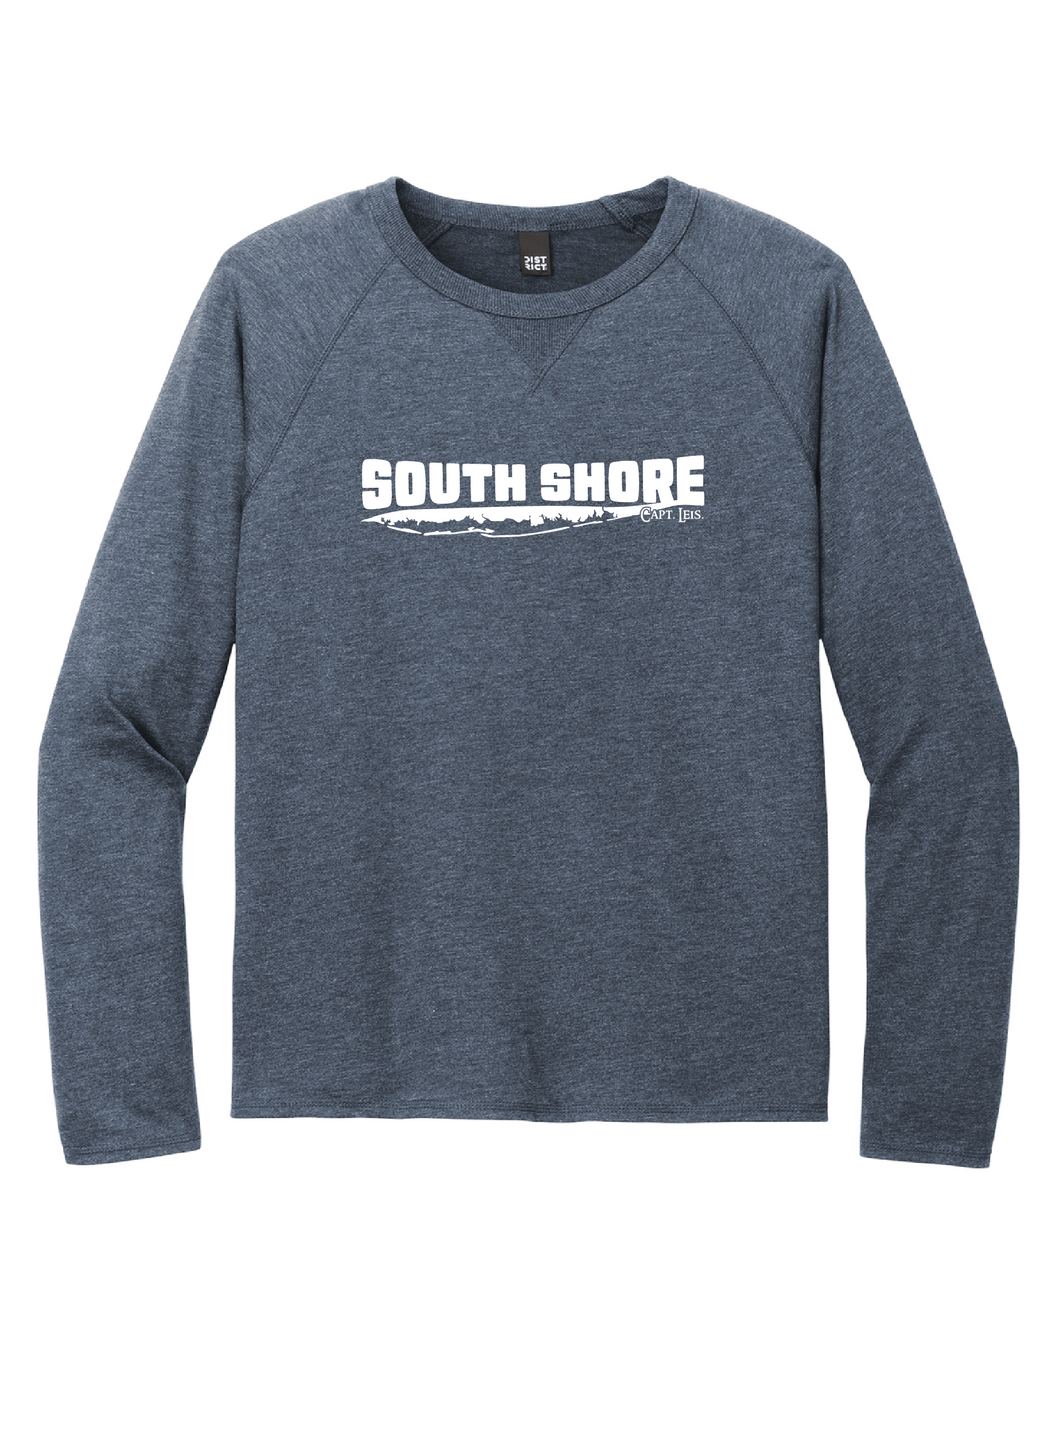 SALE: South Shore French Terry Long Sleeve - Navy